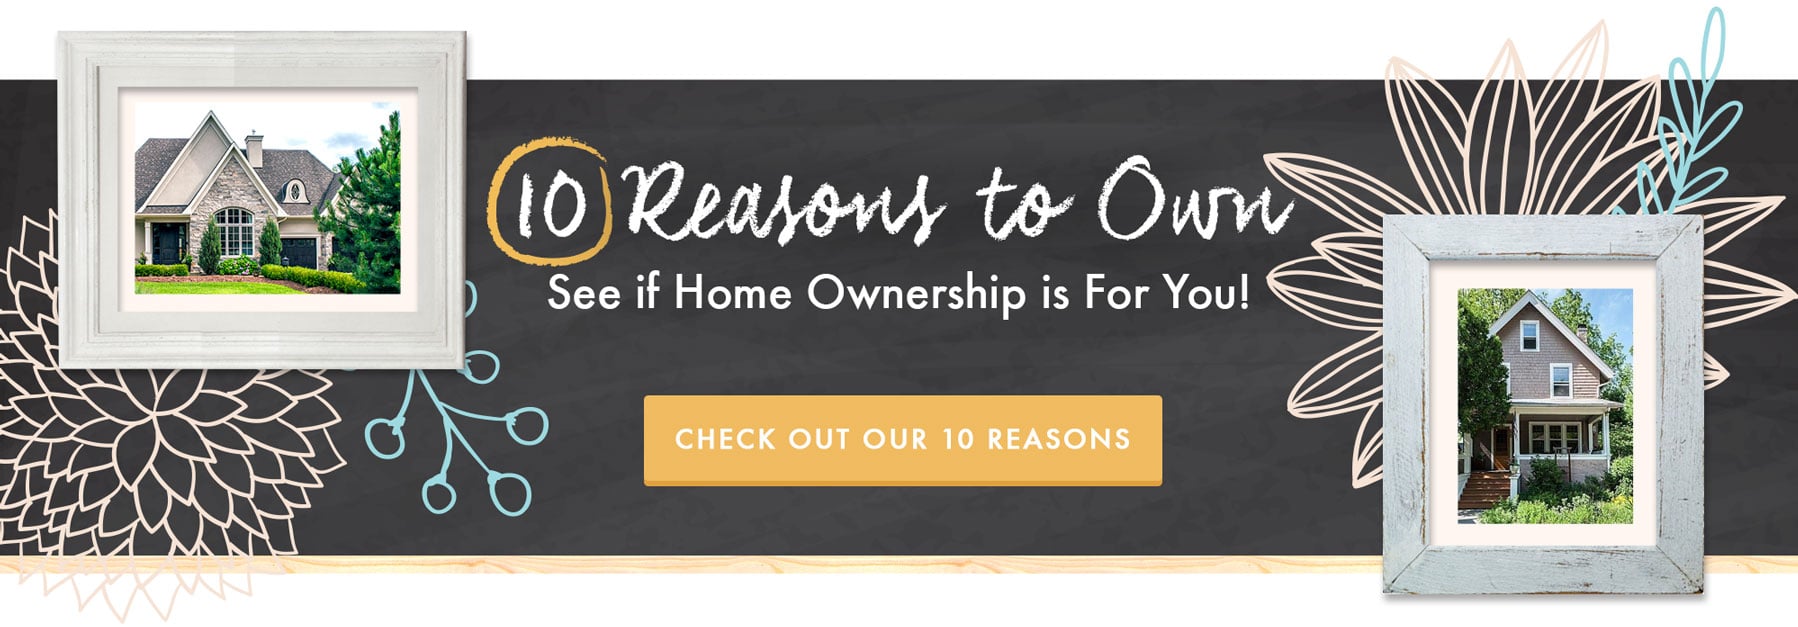 10 Reasons to Own a Home